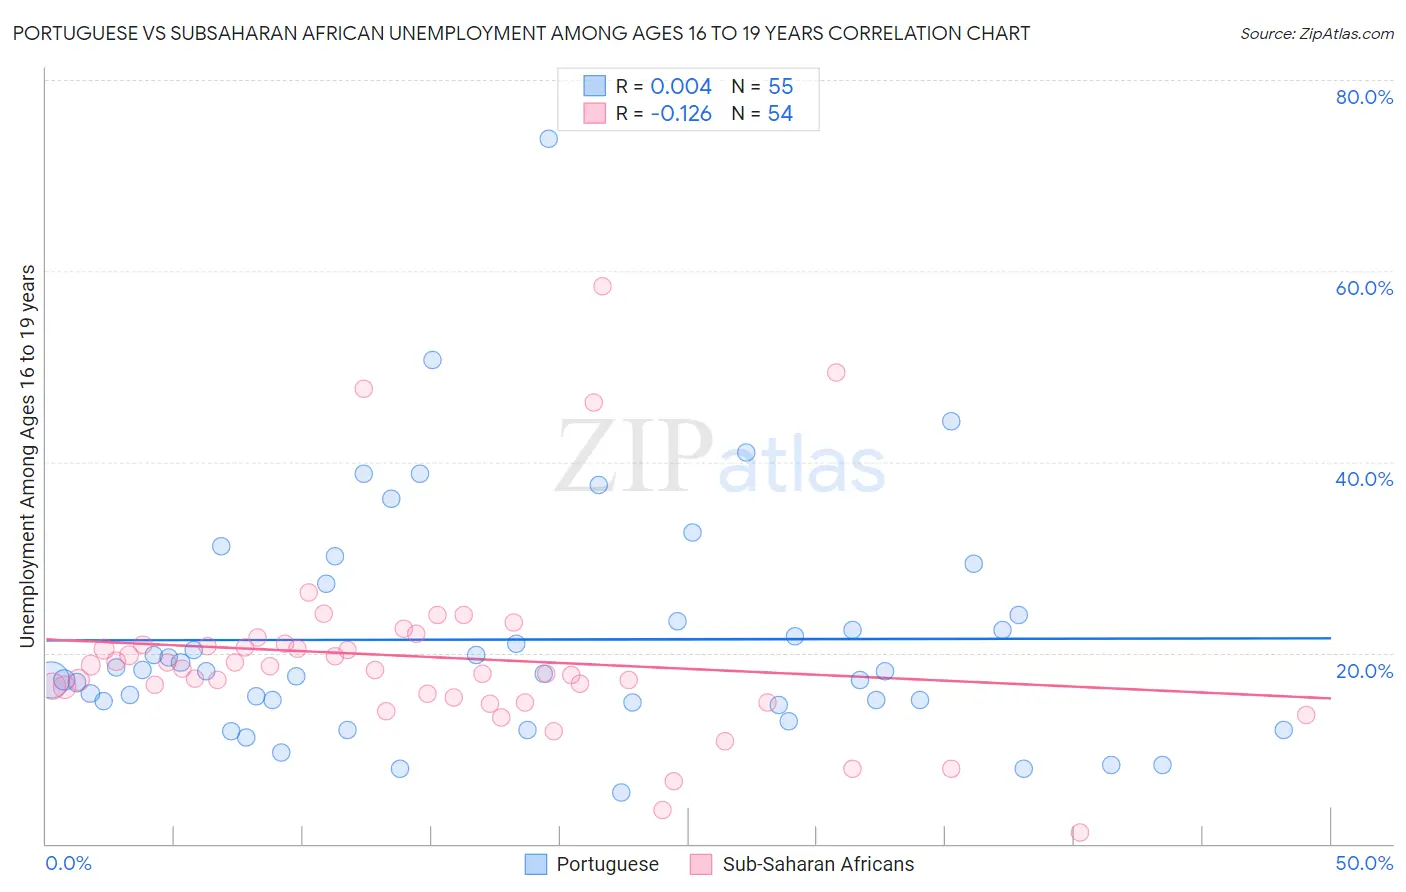 Portuguese vs Subsaharan African Unemployment Among Ages 16 to 19 years